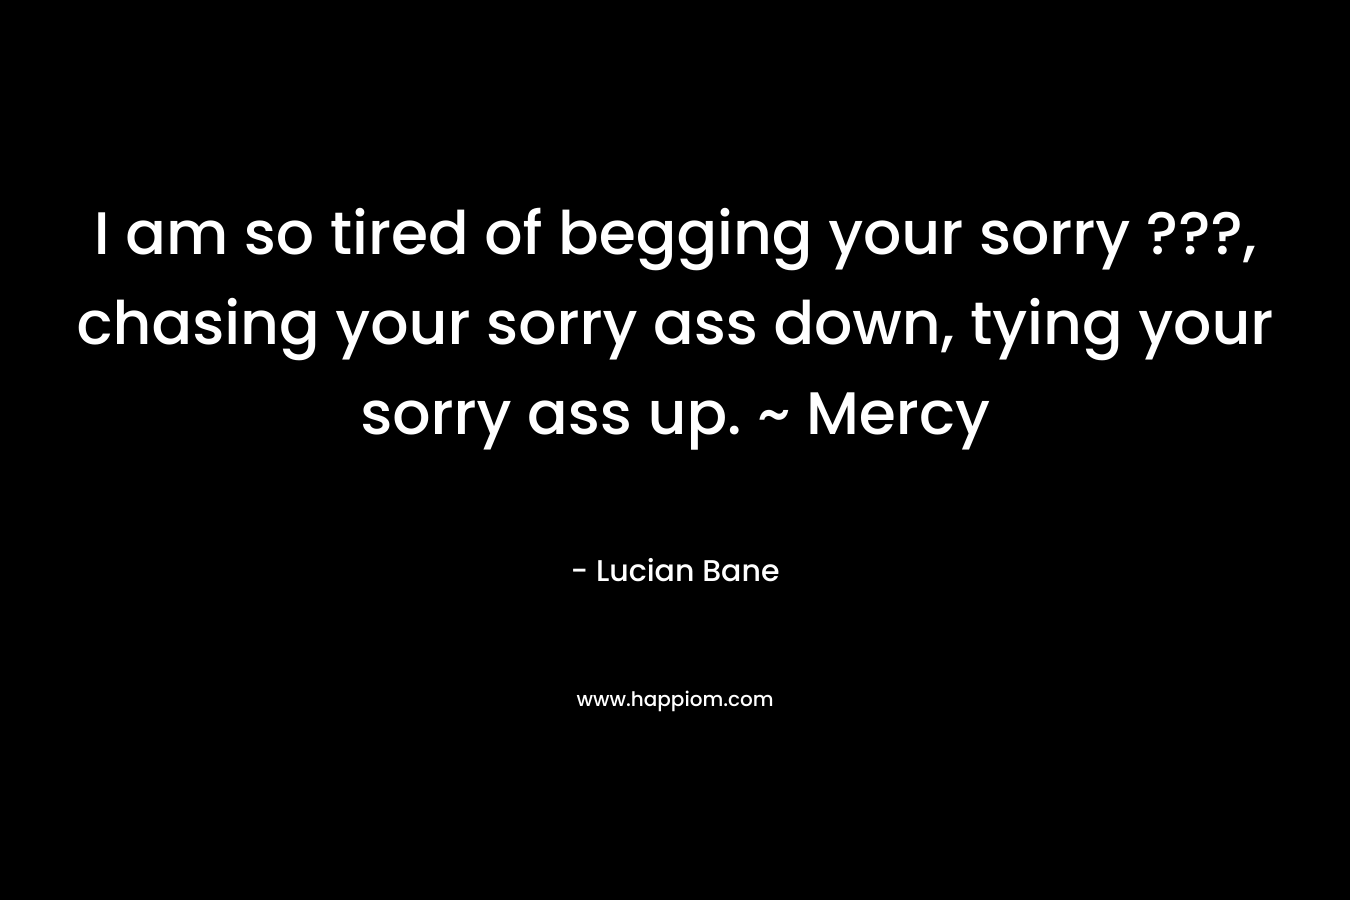 I am so tired of begging your sorry ???, chasing your sorry ass down, tying your sorry ass up. ~ Mercy